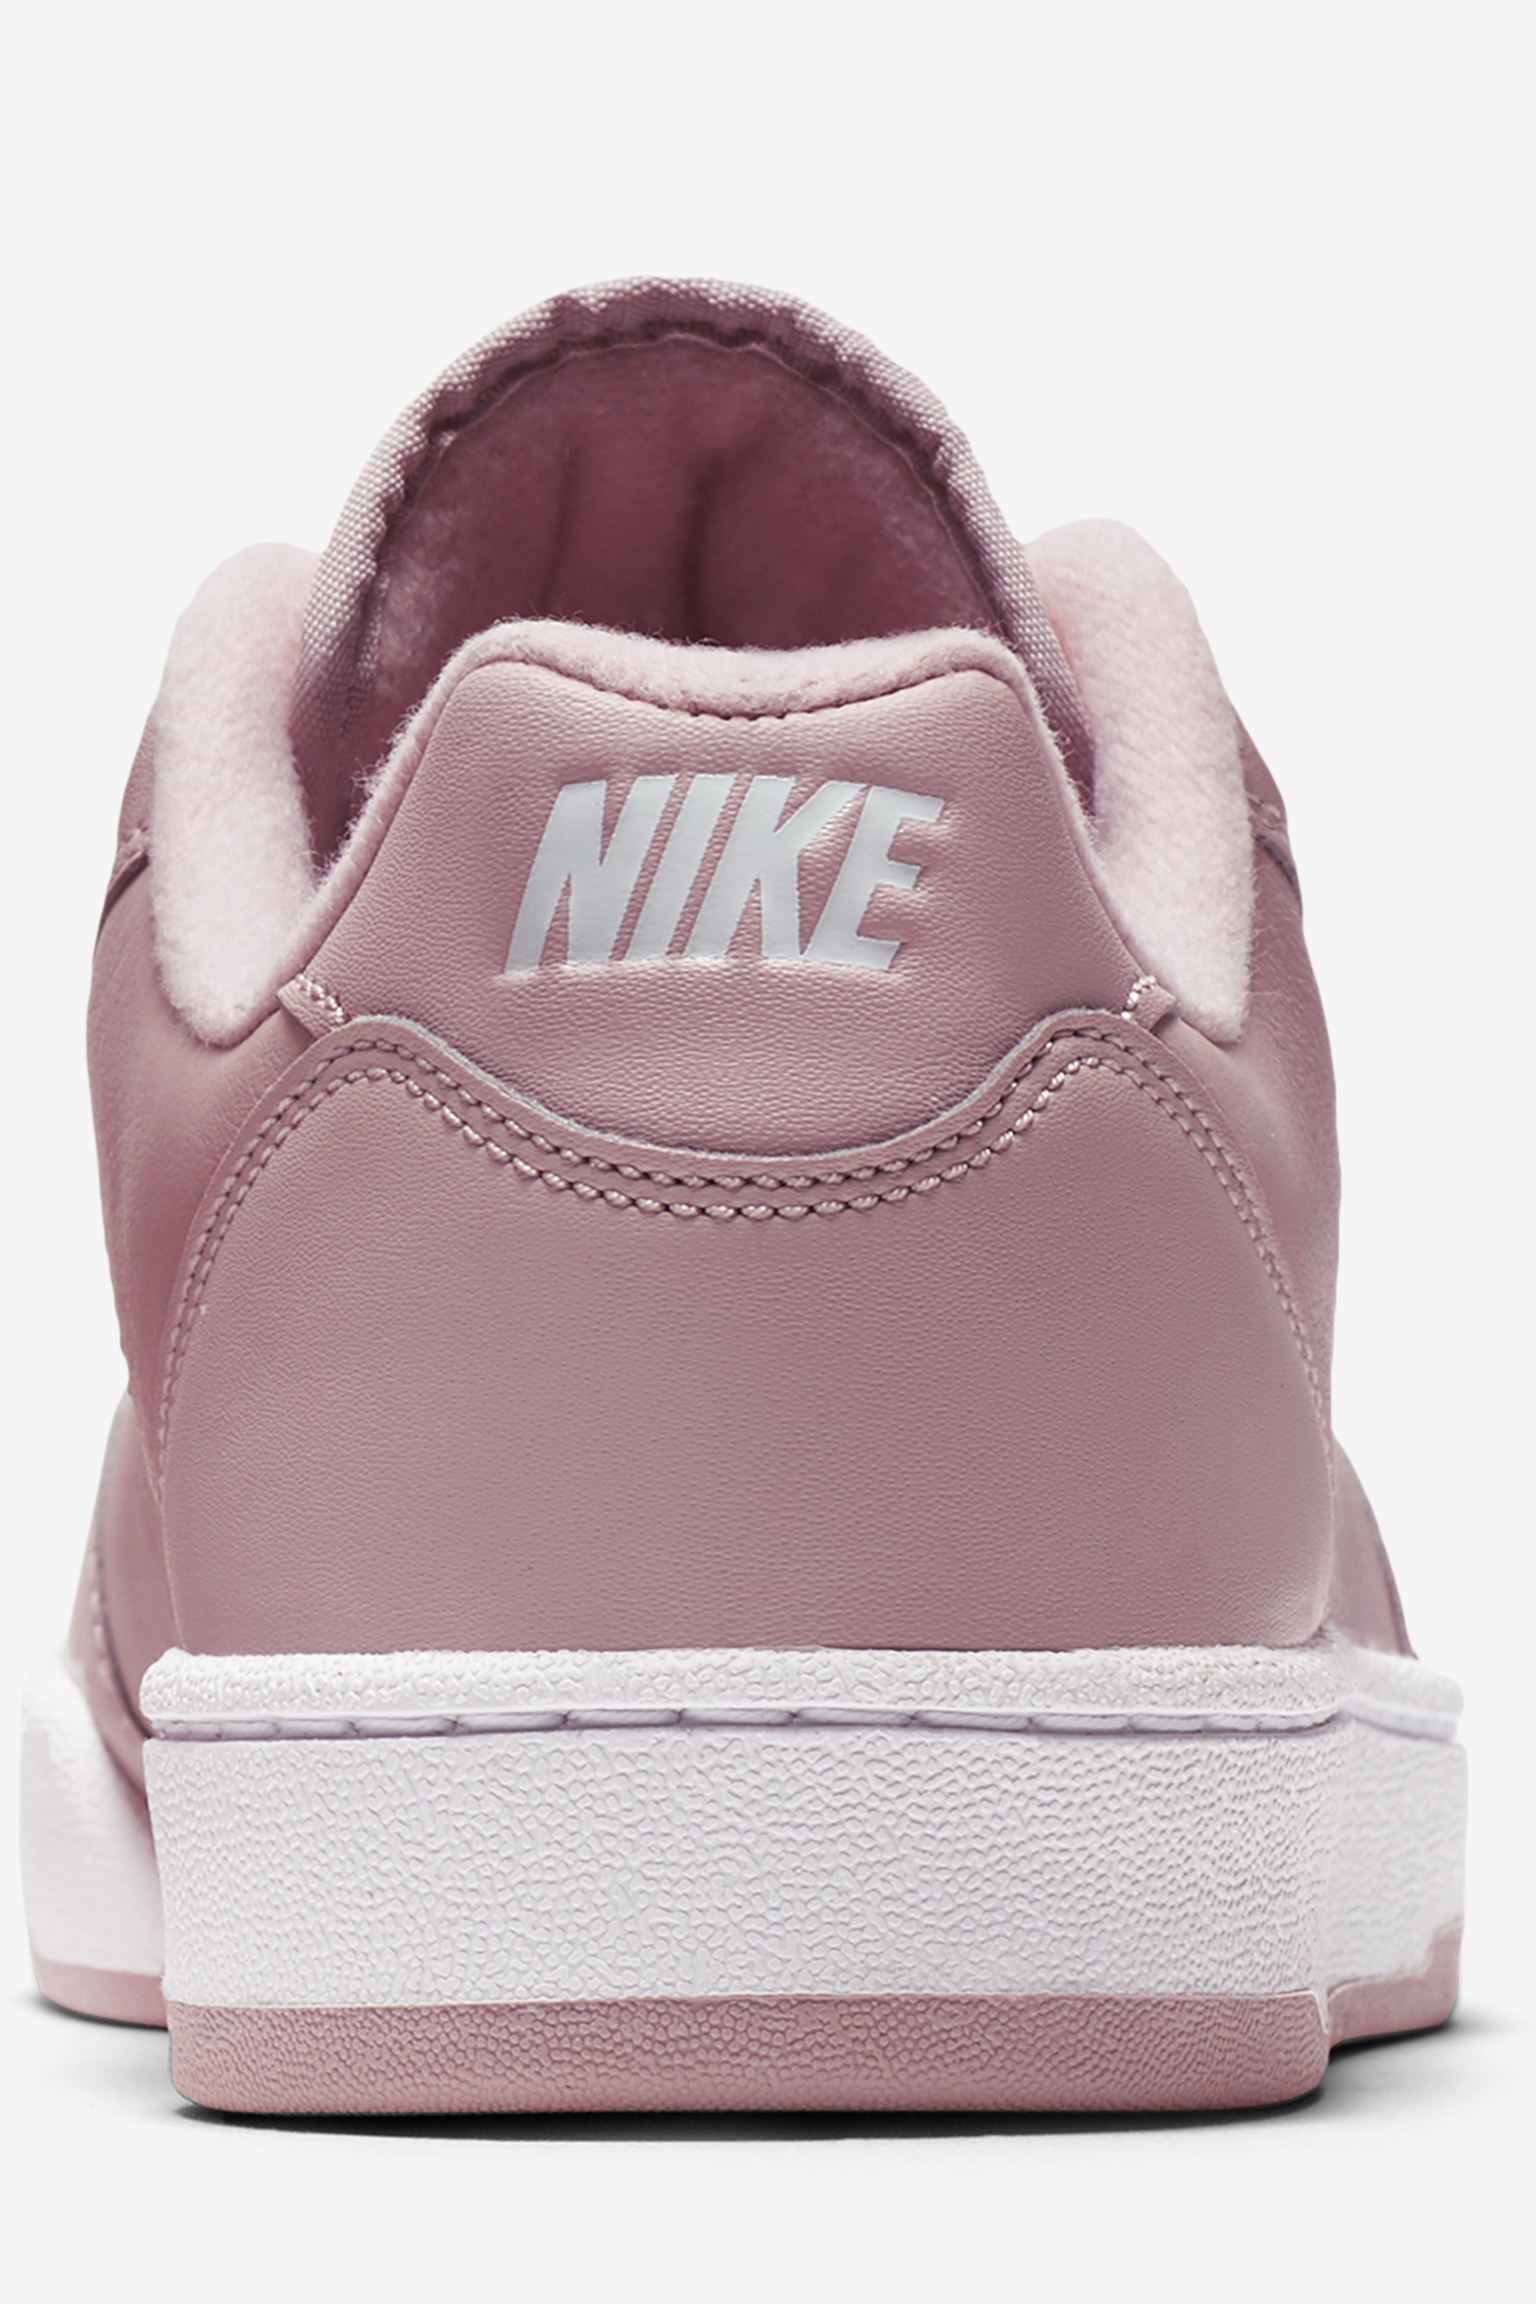 nike particle rose